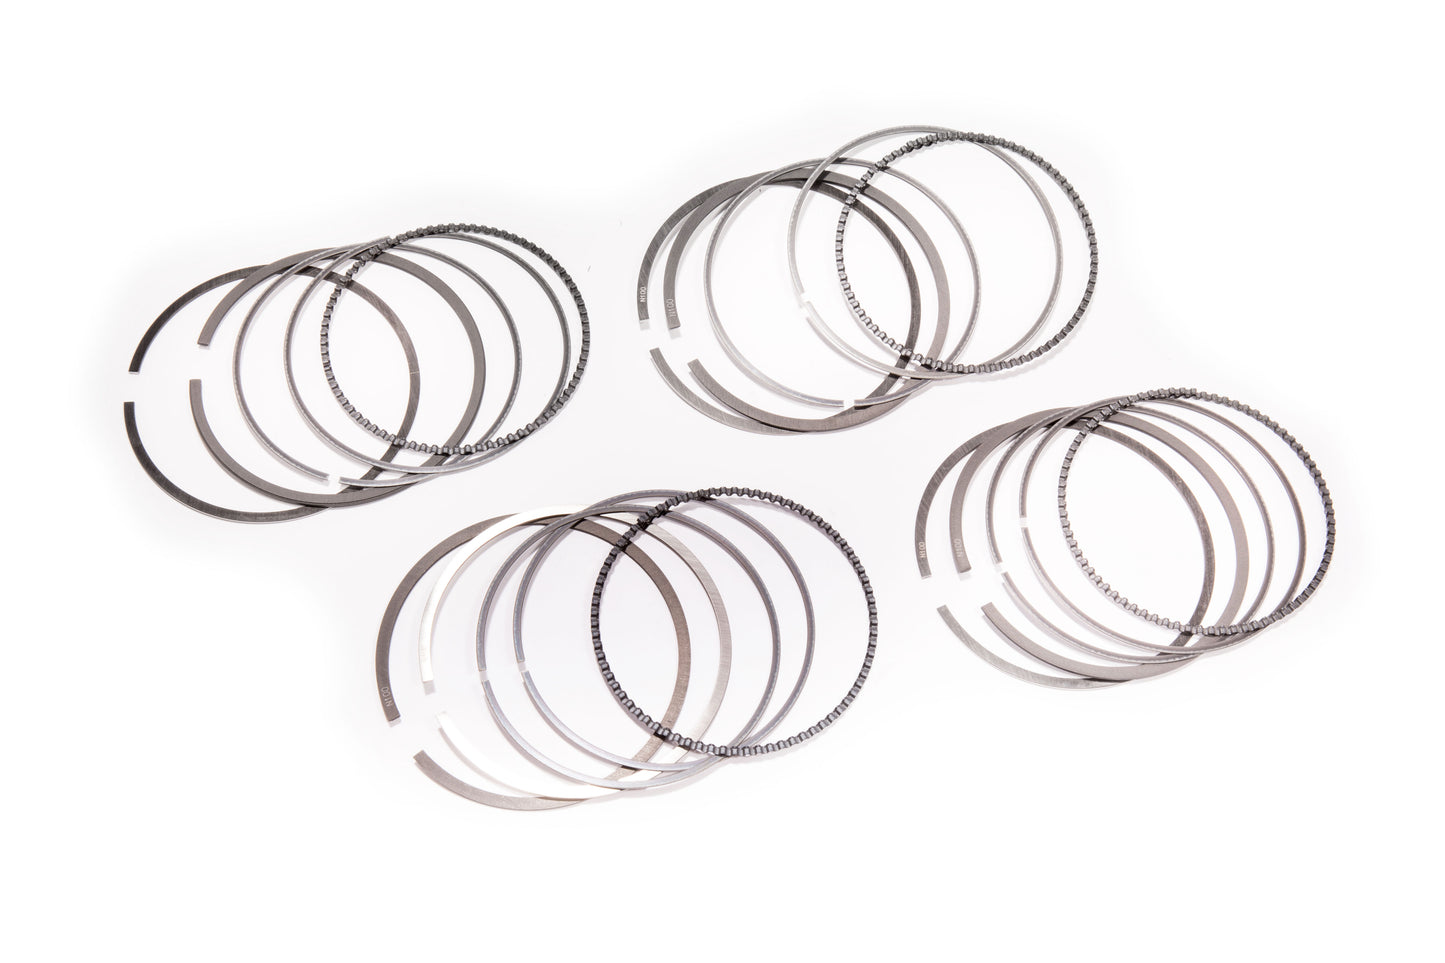 OMEGA FORGED PISTONS 73.5mm - VARIOUS SHORT HEIGHTS